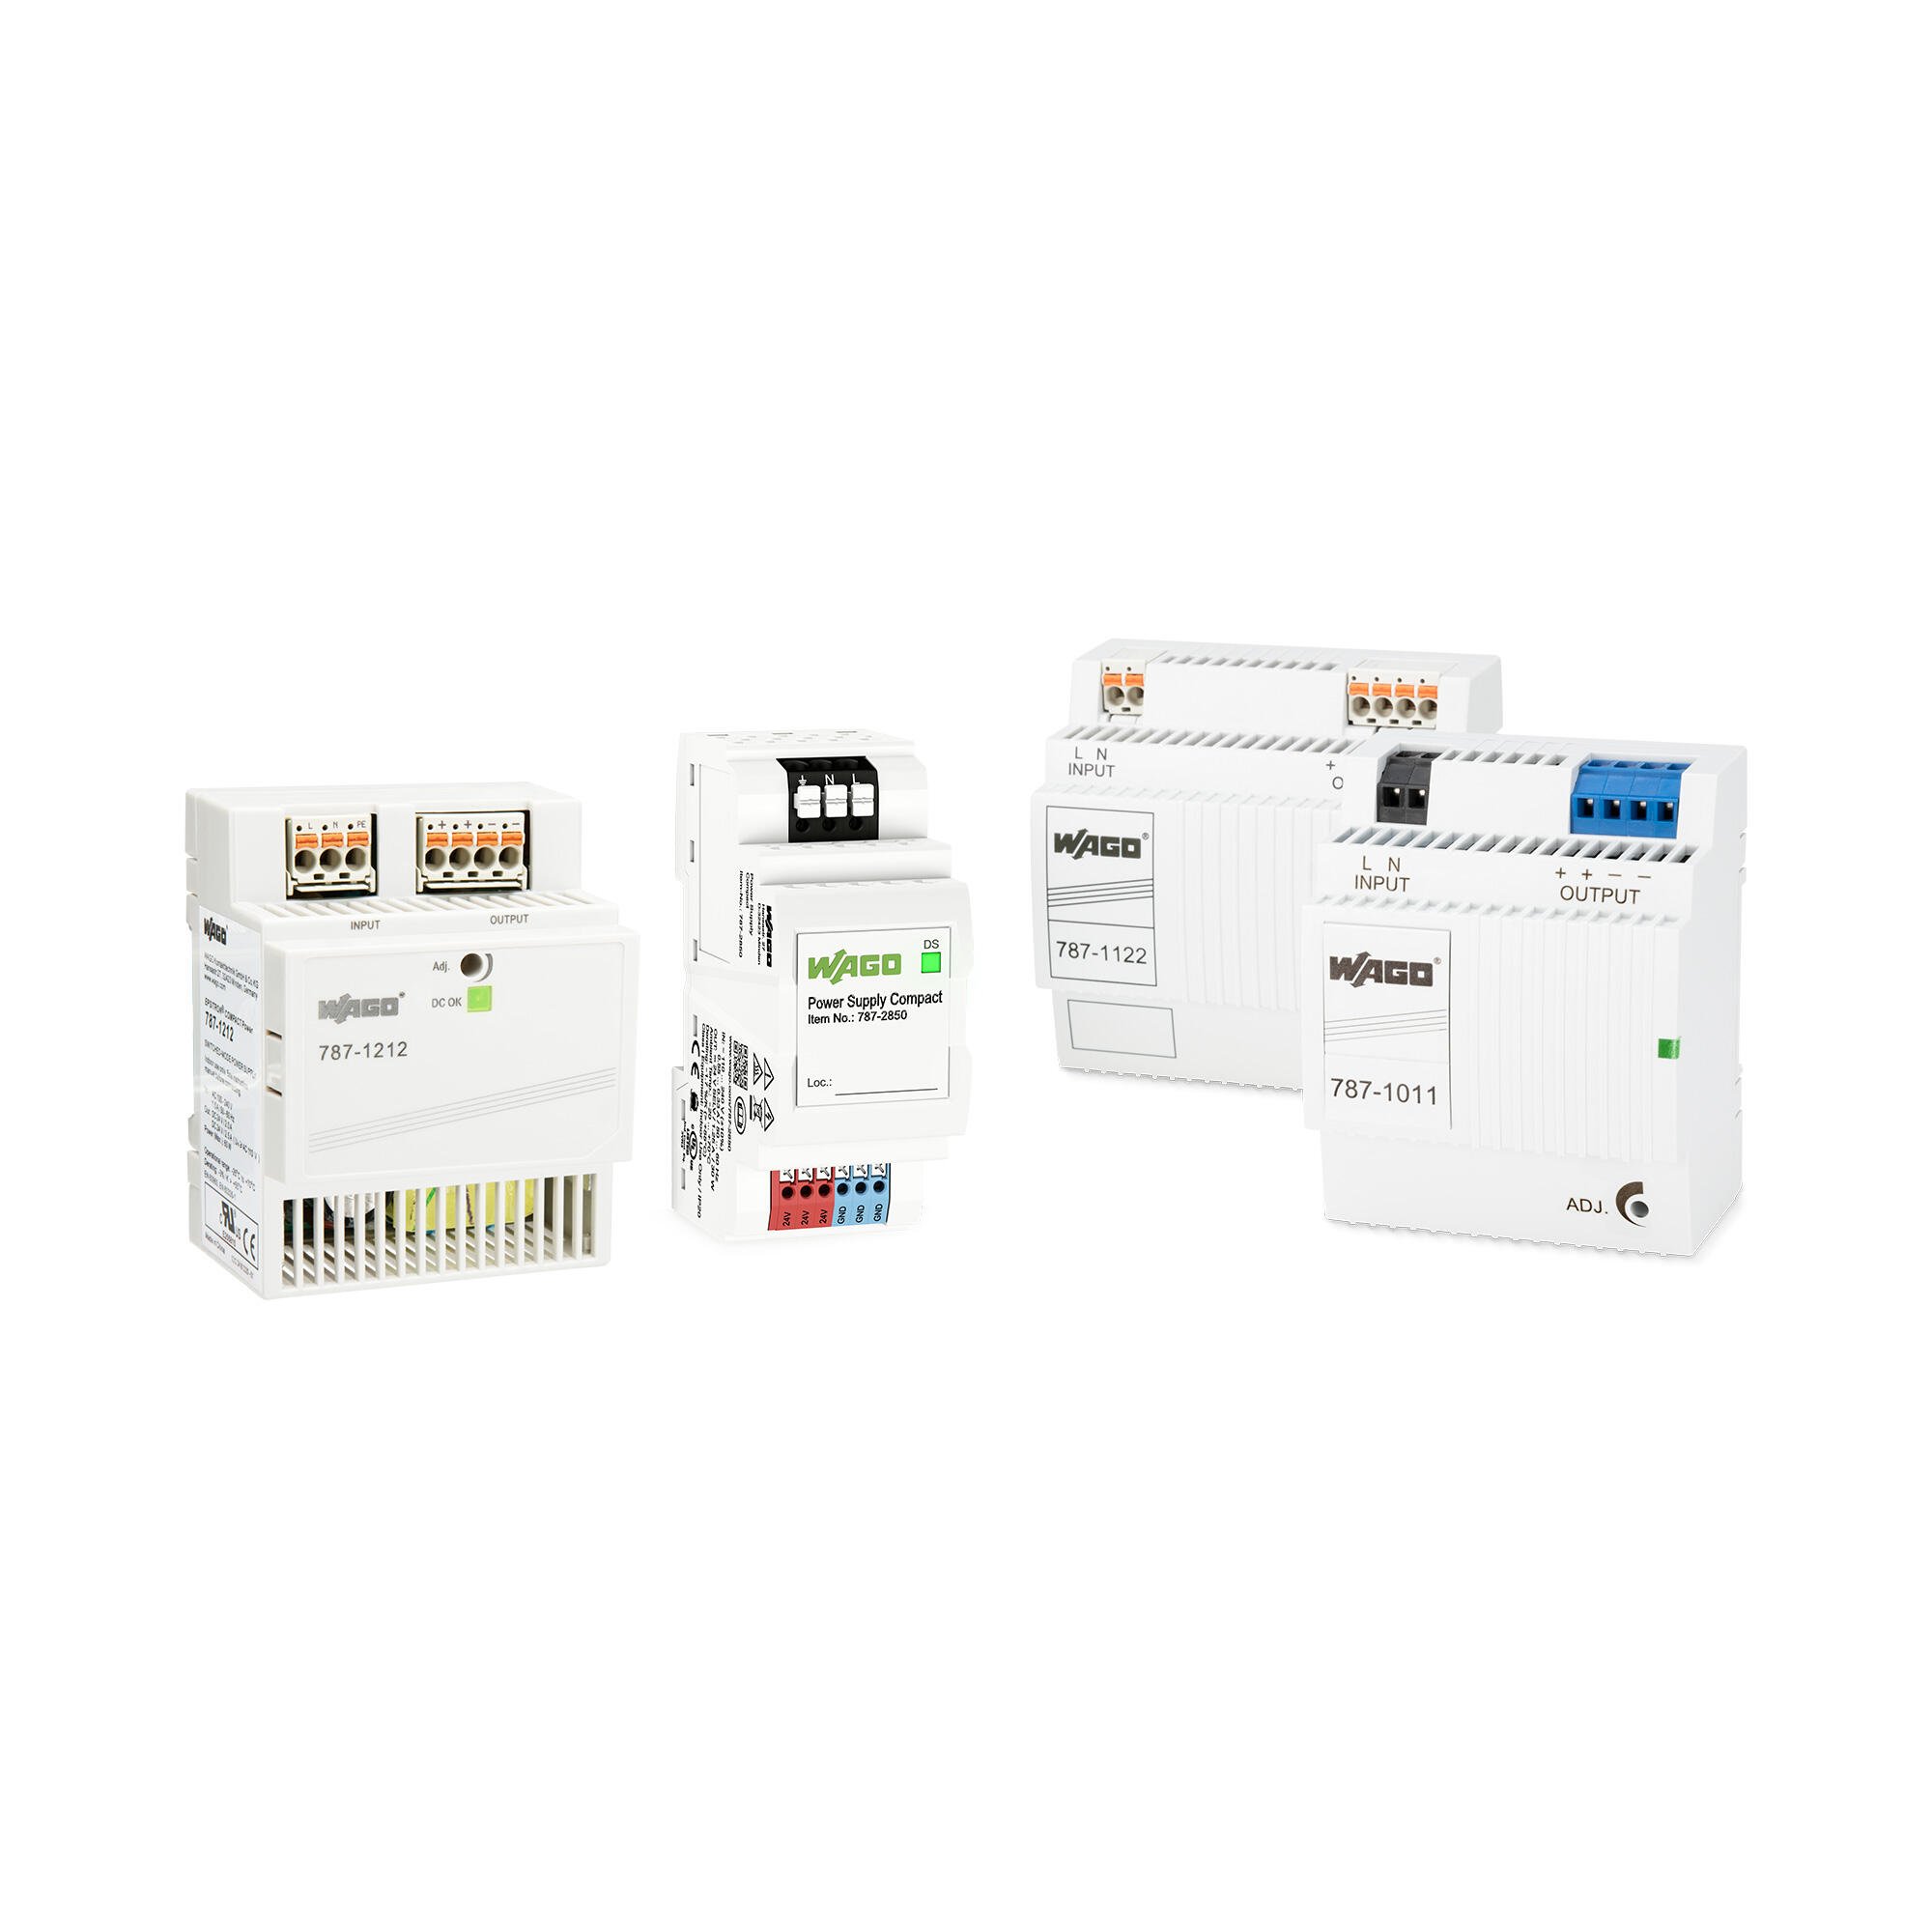 WAGO Compact Power Supplies is small with high-performance for DIN-rail-mount housings